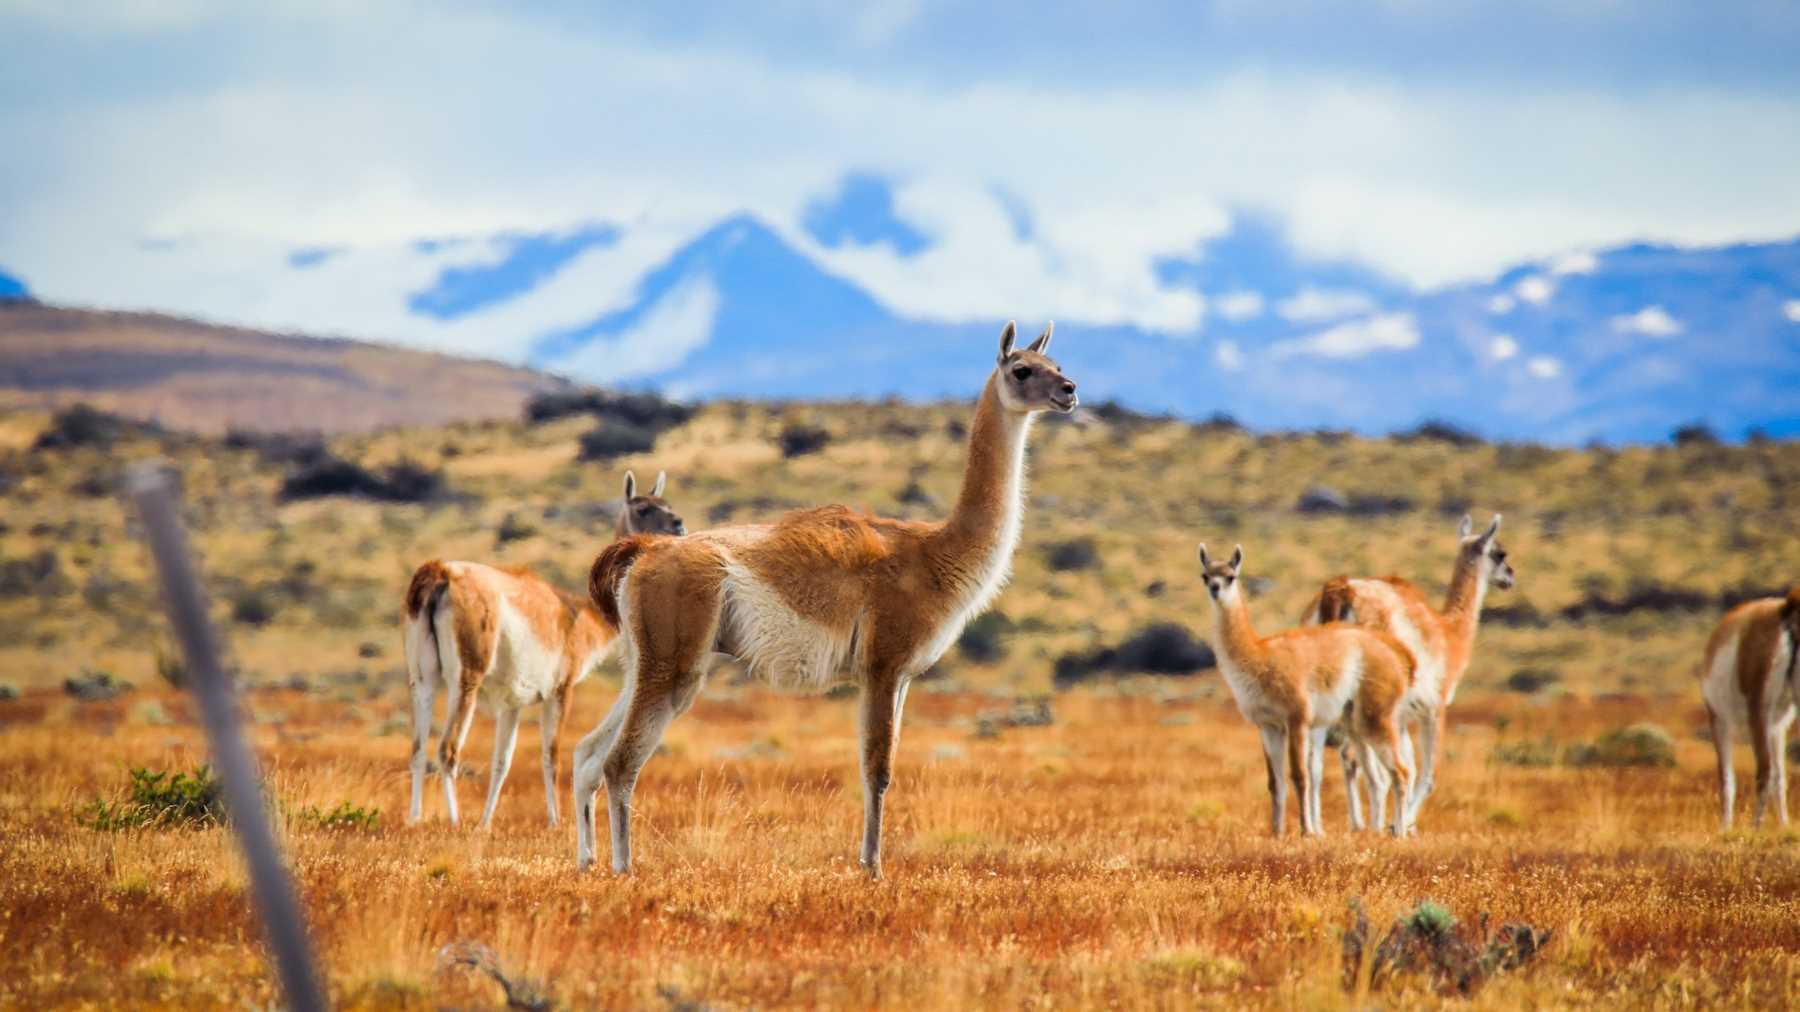 Orange grass in the foreground and blue mountains in the background frame a group of guanacos